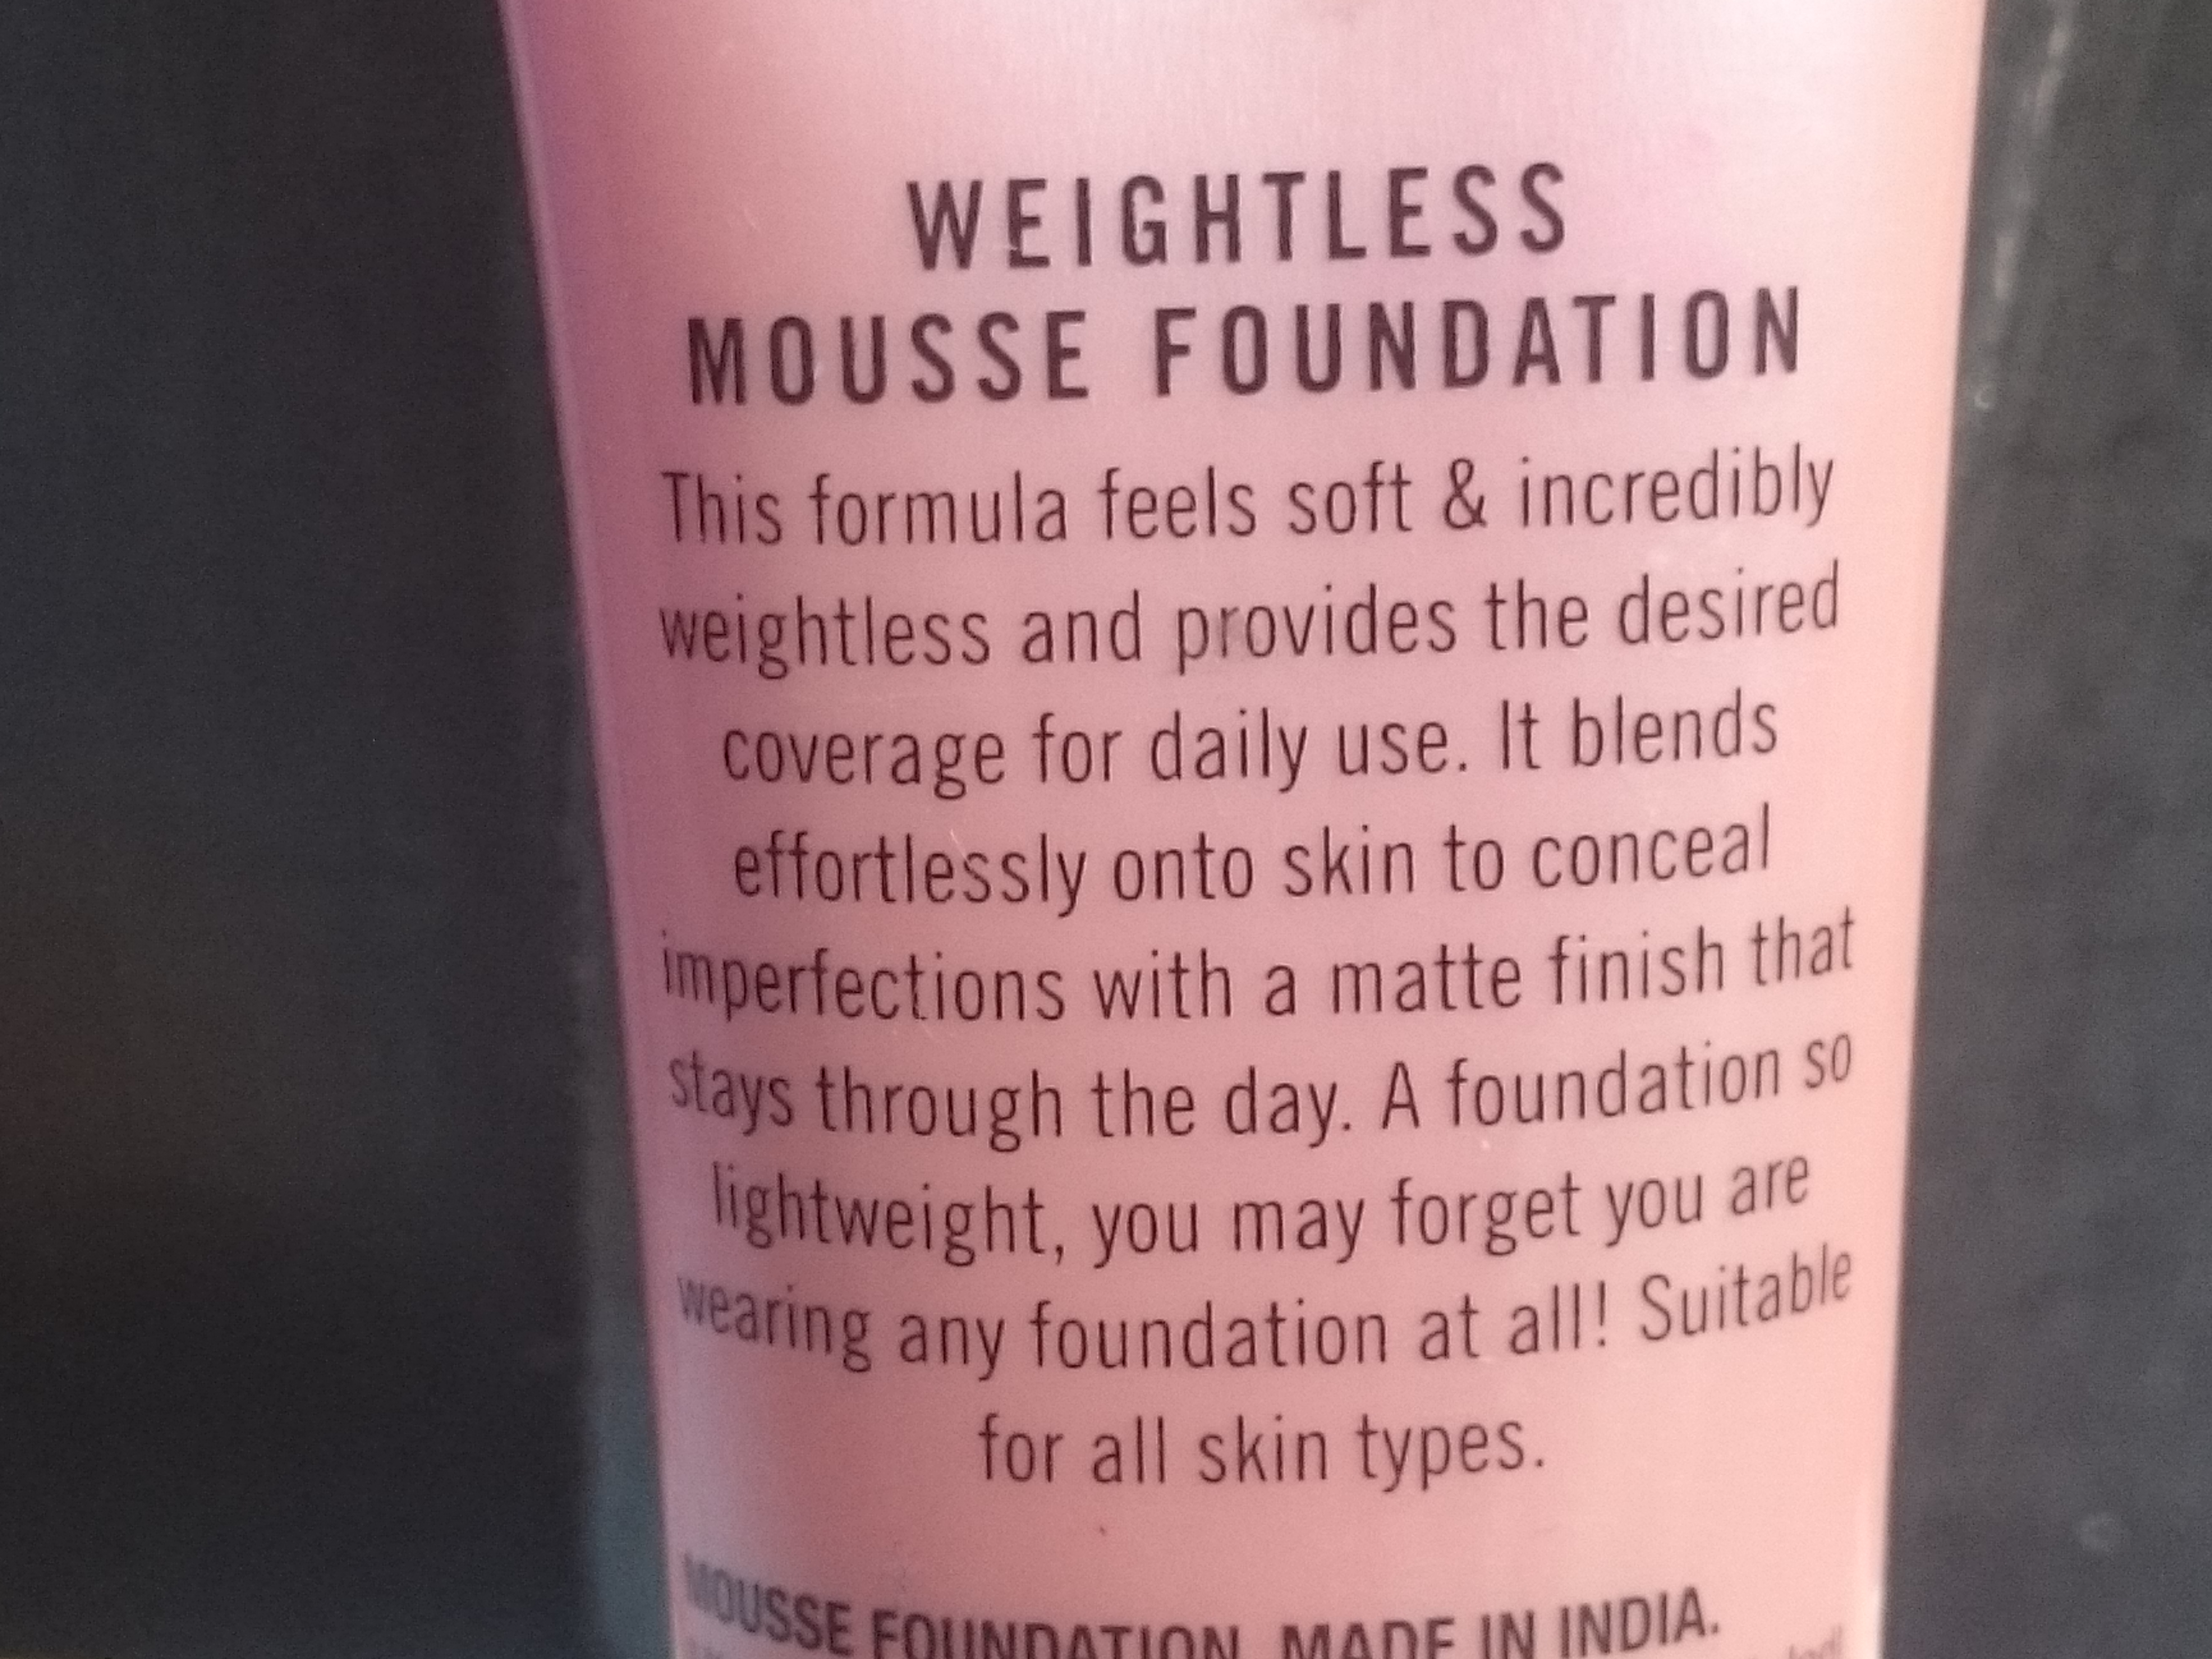 lakme-9-to-5-weightless-foundation-claims